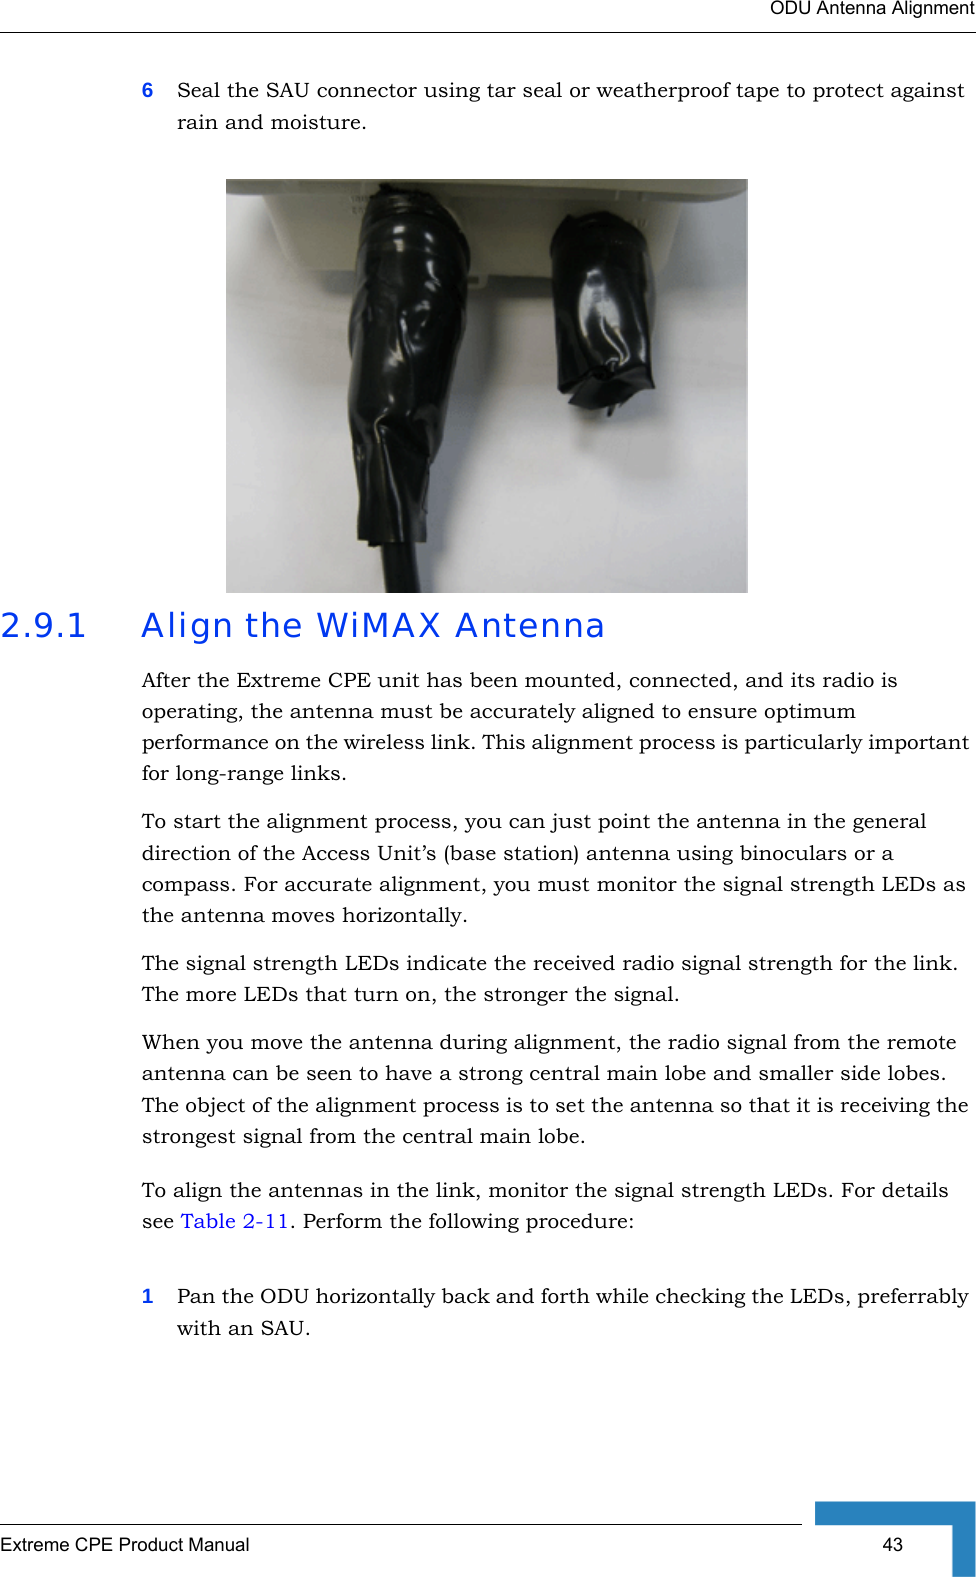 ODU Antenna AlignmentExtreme CPE Product Manual  436Seal the SAU connector using tar seal or weatherproof tape to protect against rain and moisture.2.9.1 Align the WiMAX AntennaAfter the Extreme CPE unit has been mounted, connected, and its radio is operating, the antenna must be accurately aligned to ensure optimum performance on the wireless link. This alignment process is particularly important for long-range links. To start the alignment process, you can just point the antenna in the general direction of the Access Unit’s (base station) antenna using binoculars or a compass. For accurate alignment, you must monitor the signal strength LEDs as the antenna moves horizontally.The signal strength LEDs indicate the received radio signal strength for the link. The more LEDs that turn on, the stronger the signal. When you move the antenna during alignment, the radio signal from the remote antenna can be seen to have a strong central main lobe and smaller side lobes. The object of the alignment process is to set the antenna so that it is receiving the strongest signal from the central main lobe.To align the antennas in the link, monitor the signal strength LEDs. For details see Table 2-11. Perform the following procedure:1Pan the ODU horizontally back and forth while checking the LEDs, preferrably with an SAU. 